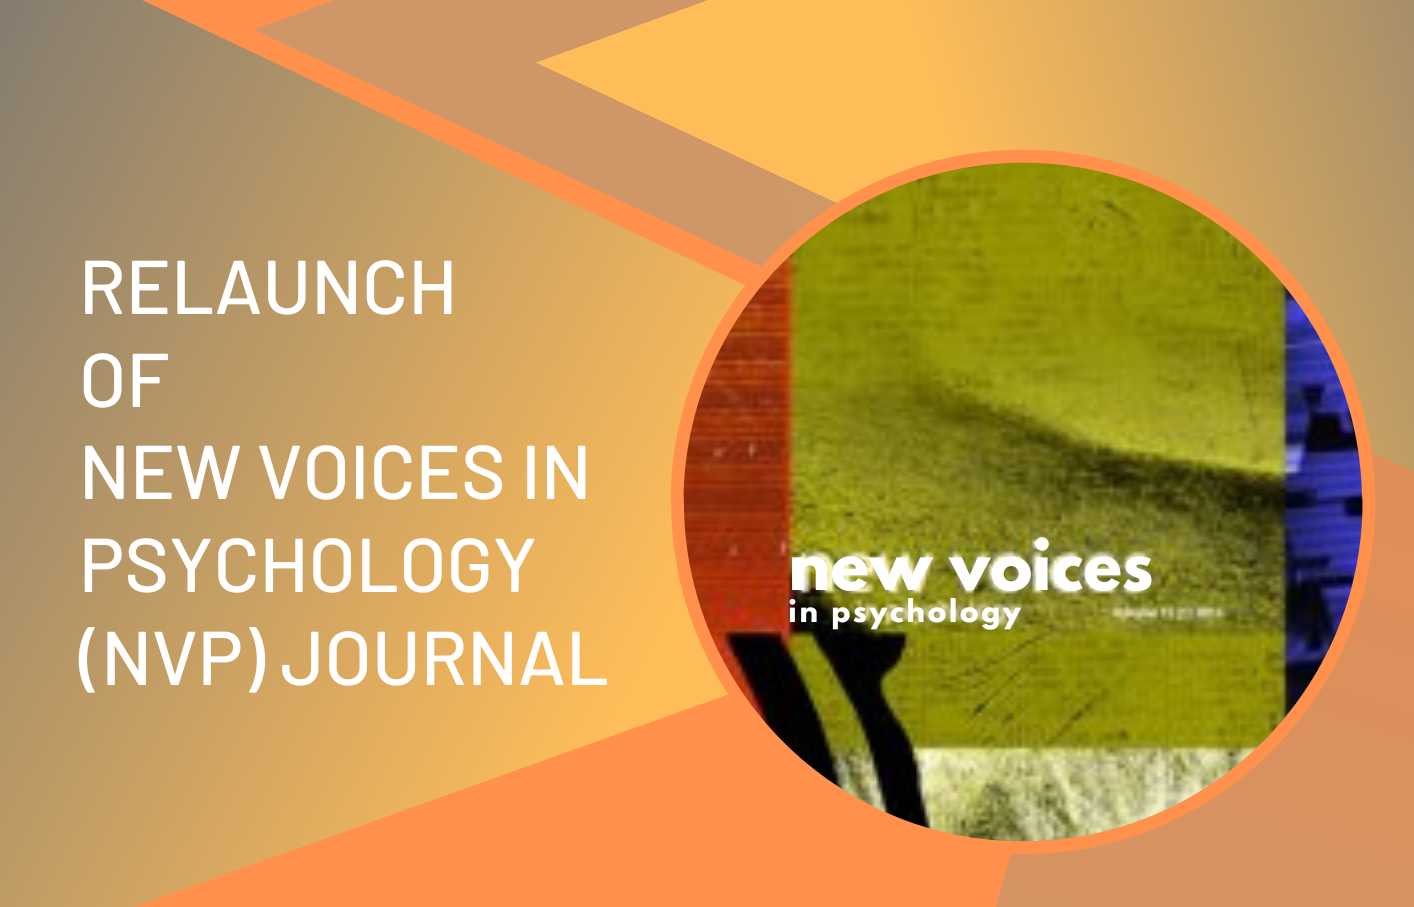 Relaunch of New Voices in Psychology Journa(1).png